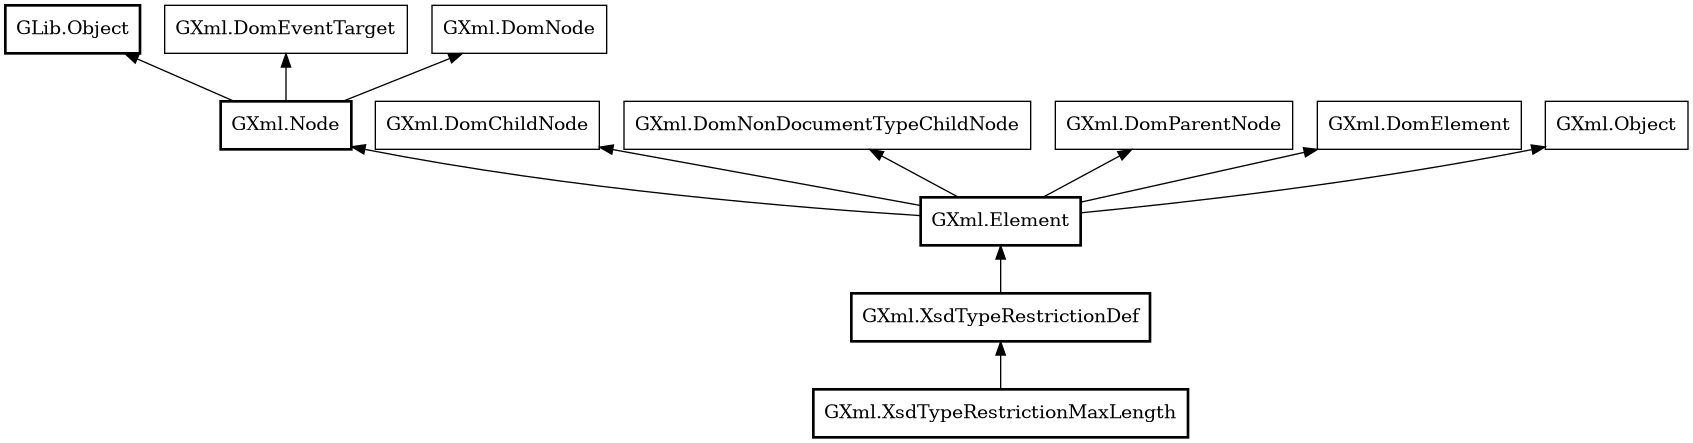 Object hierarchy for XsdTypeRestrictionMaxLength